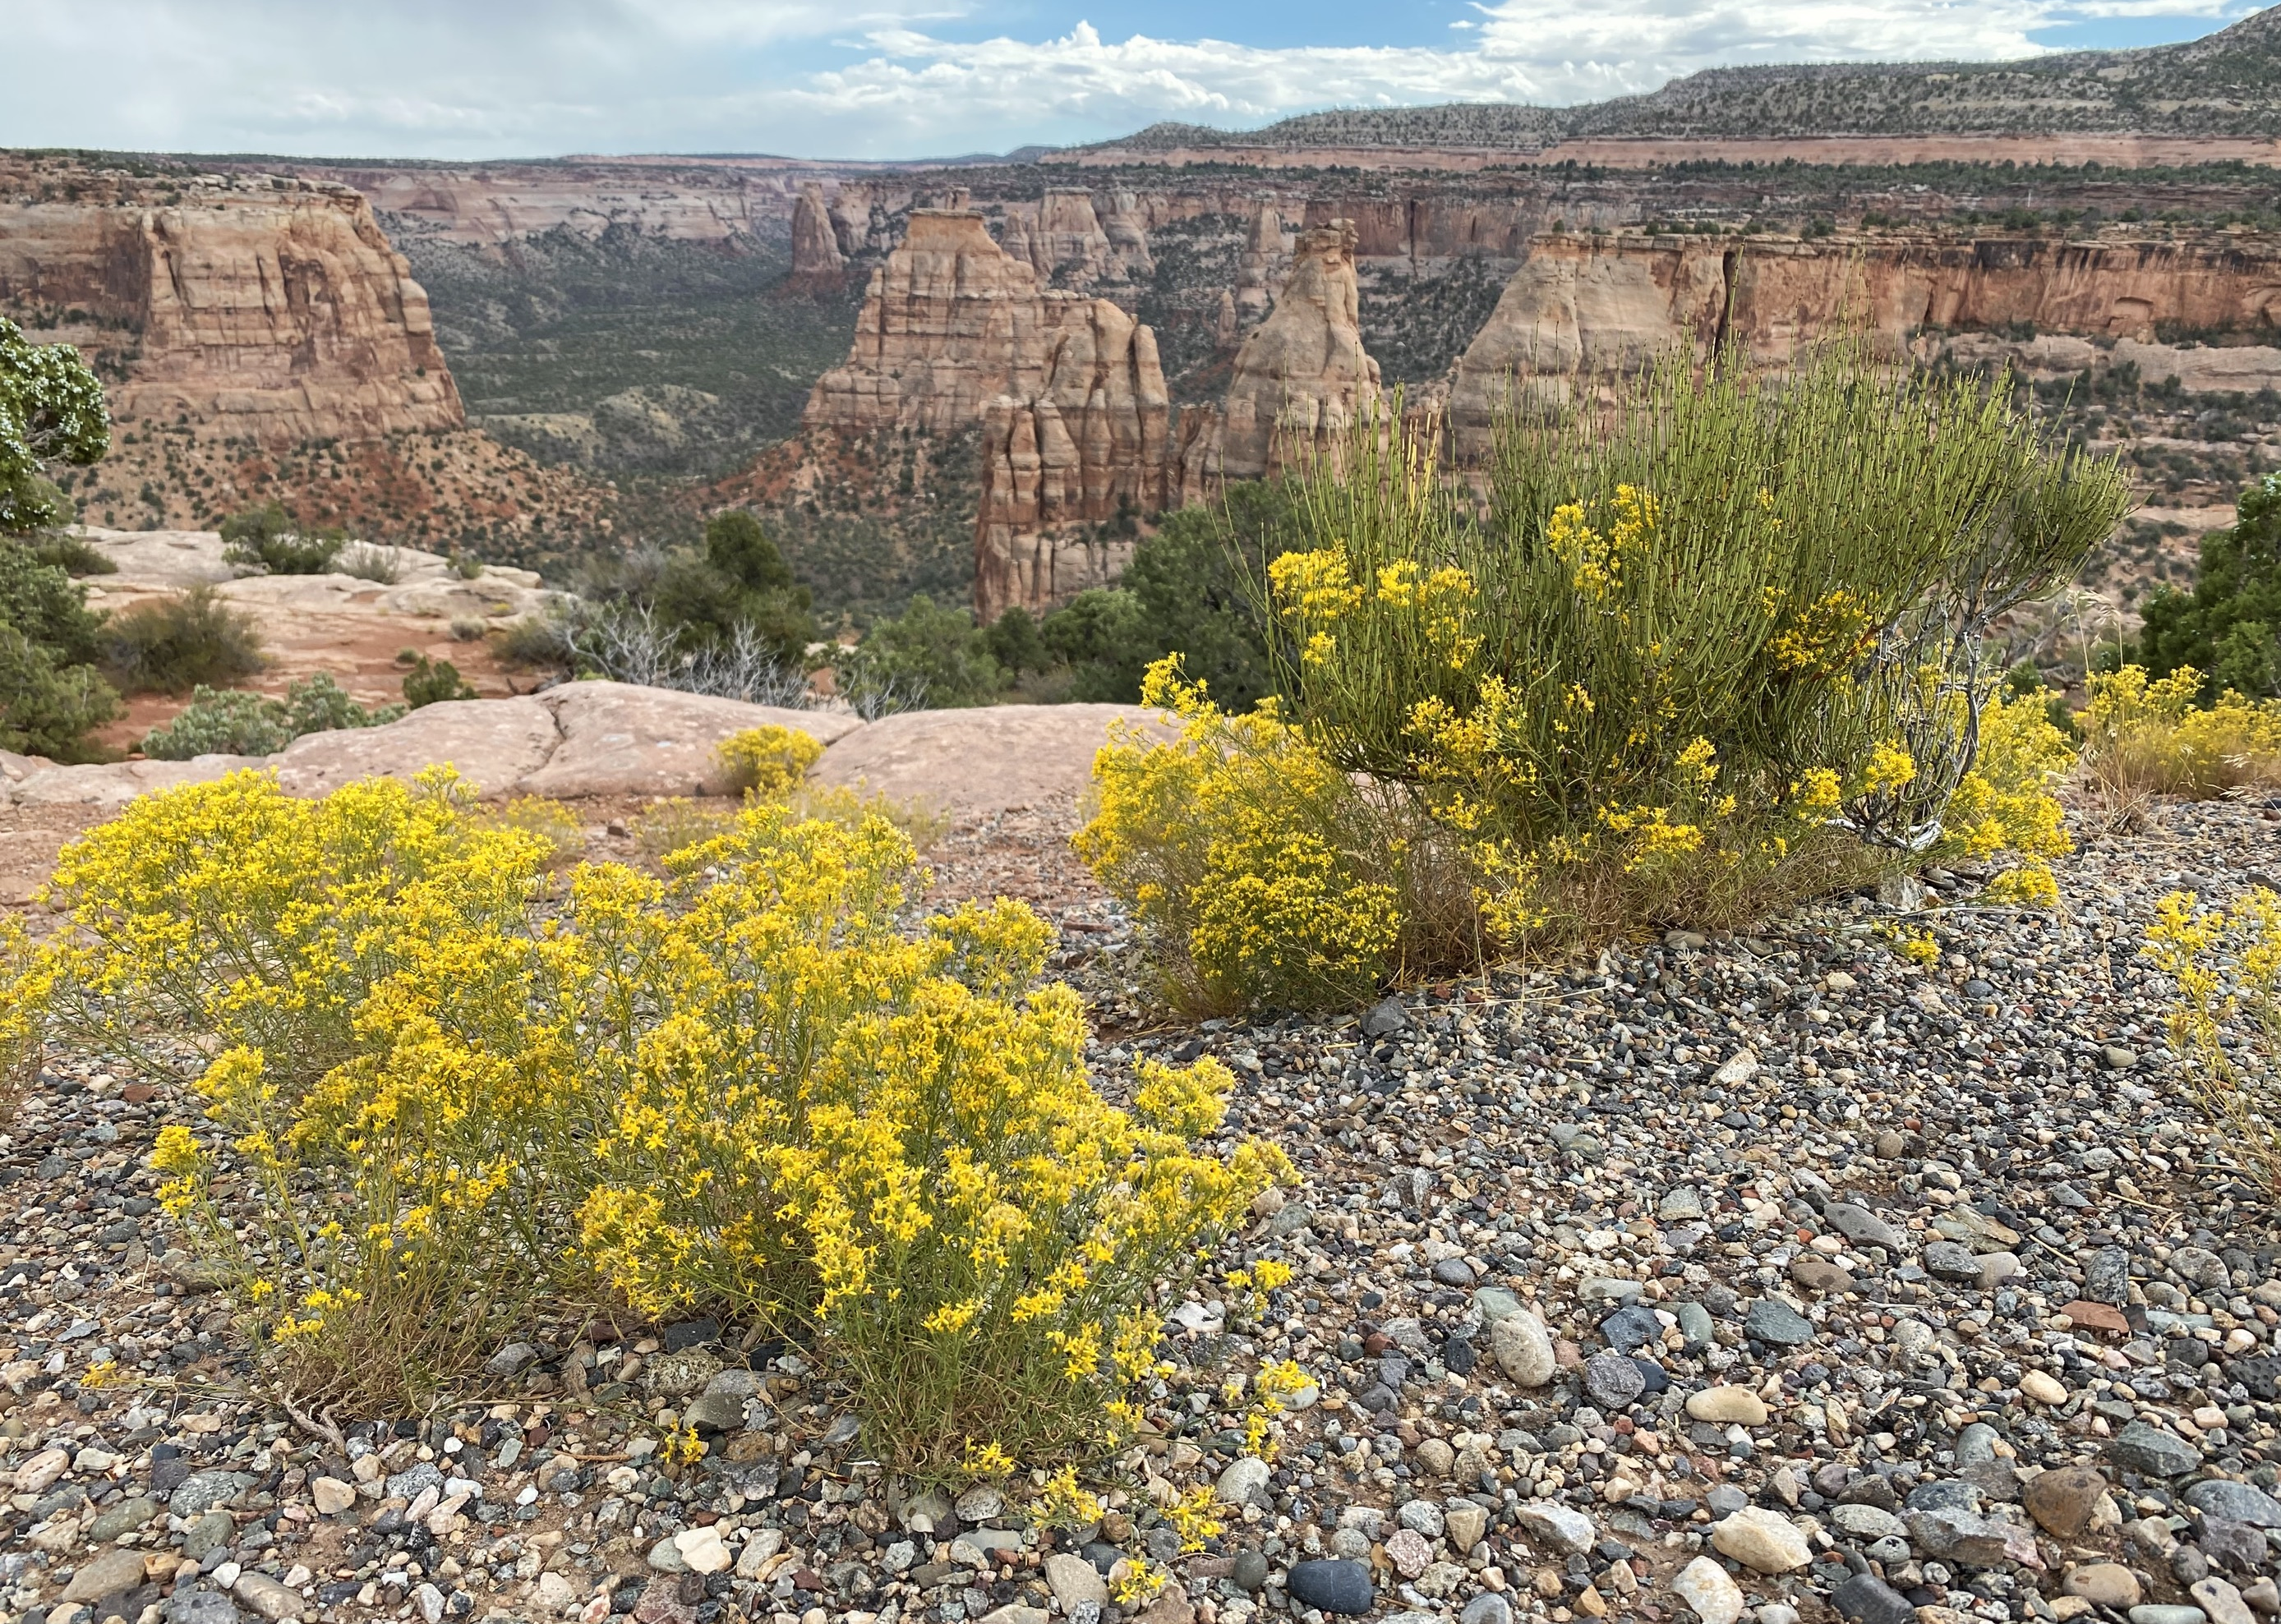 Bright yellow flowers, called Snakeweed, bloom in the foreground in front of orange cliffs and canyons.